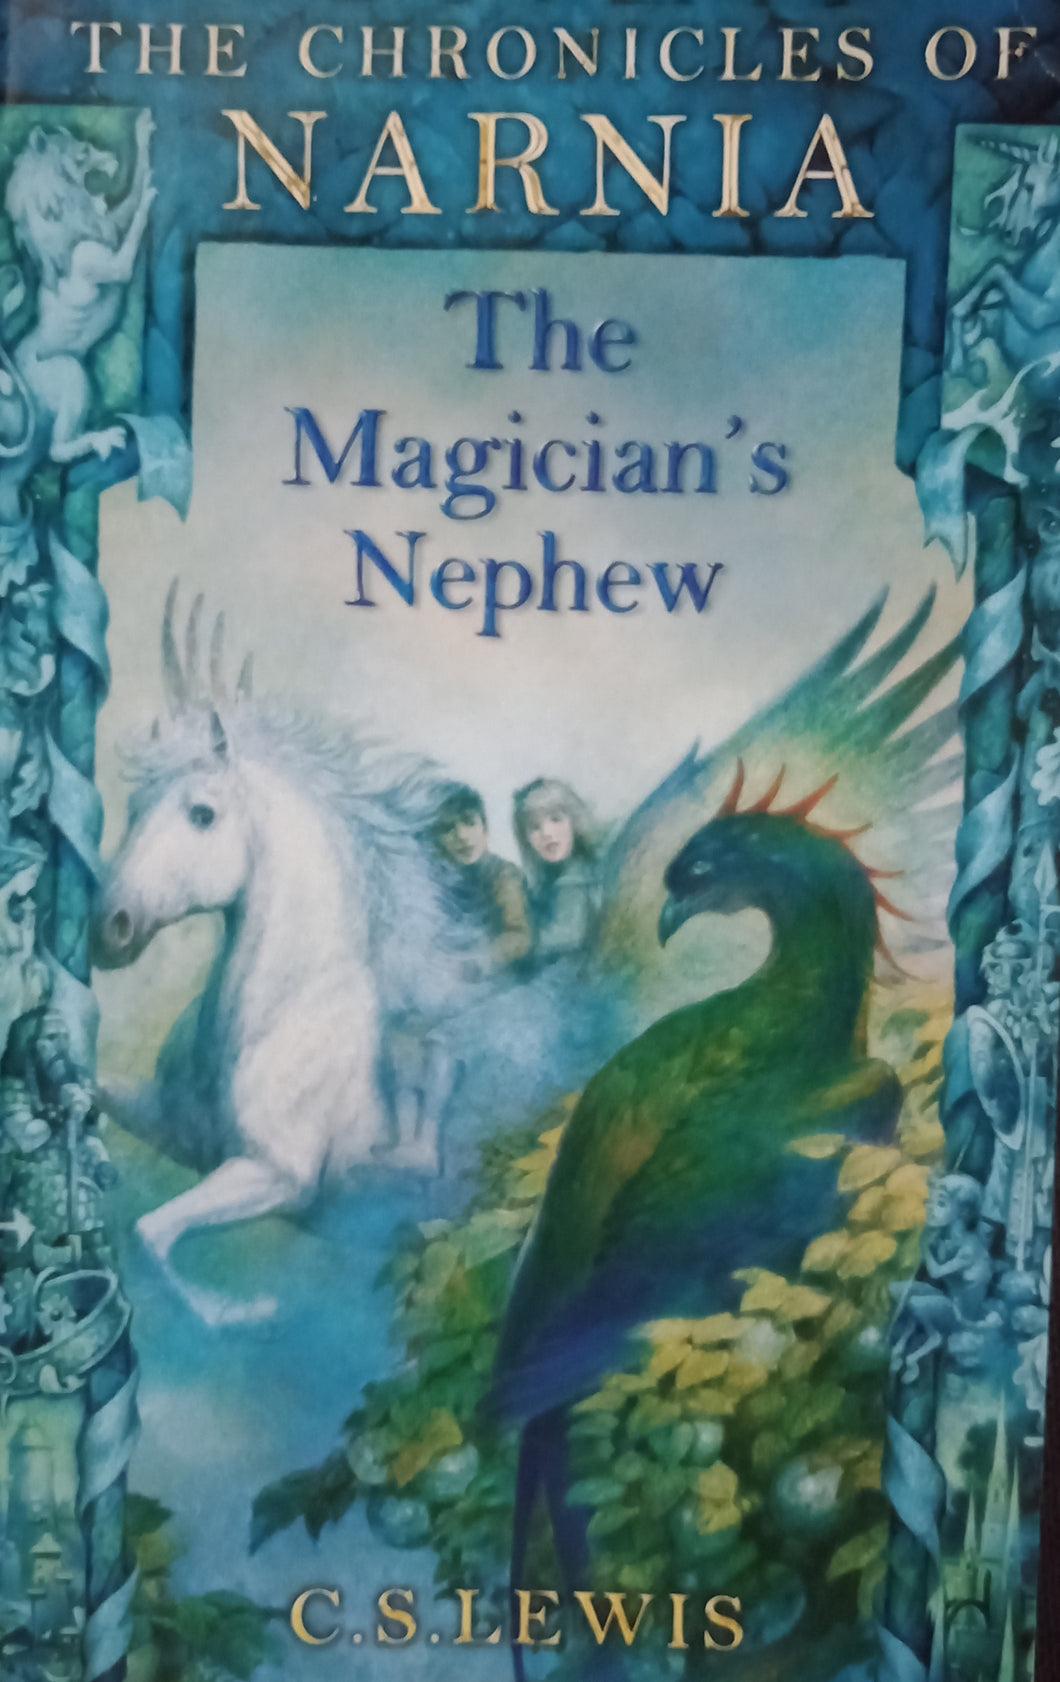 The Magician's Nephew by C.S. Lewis WS